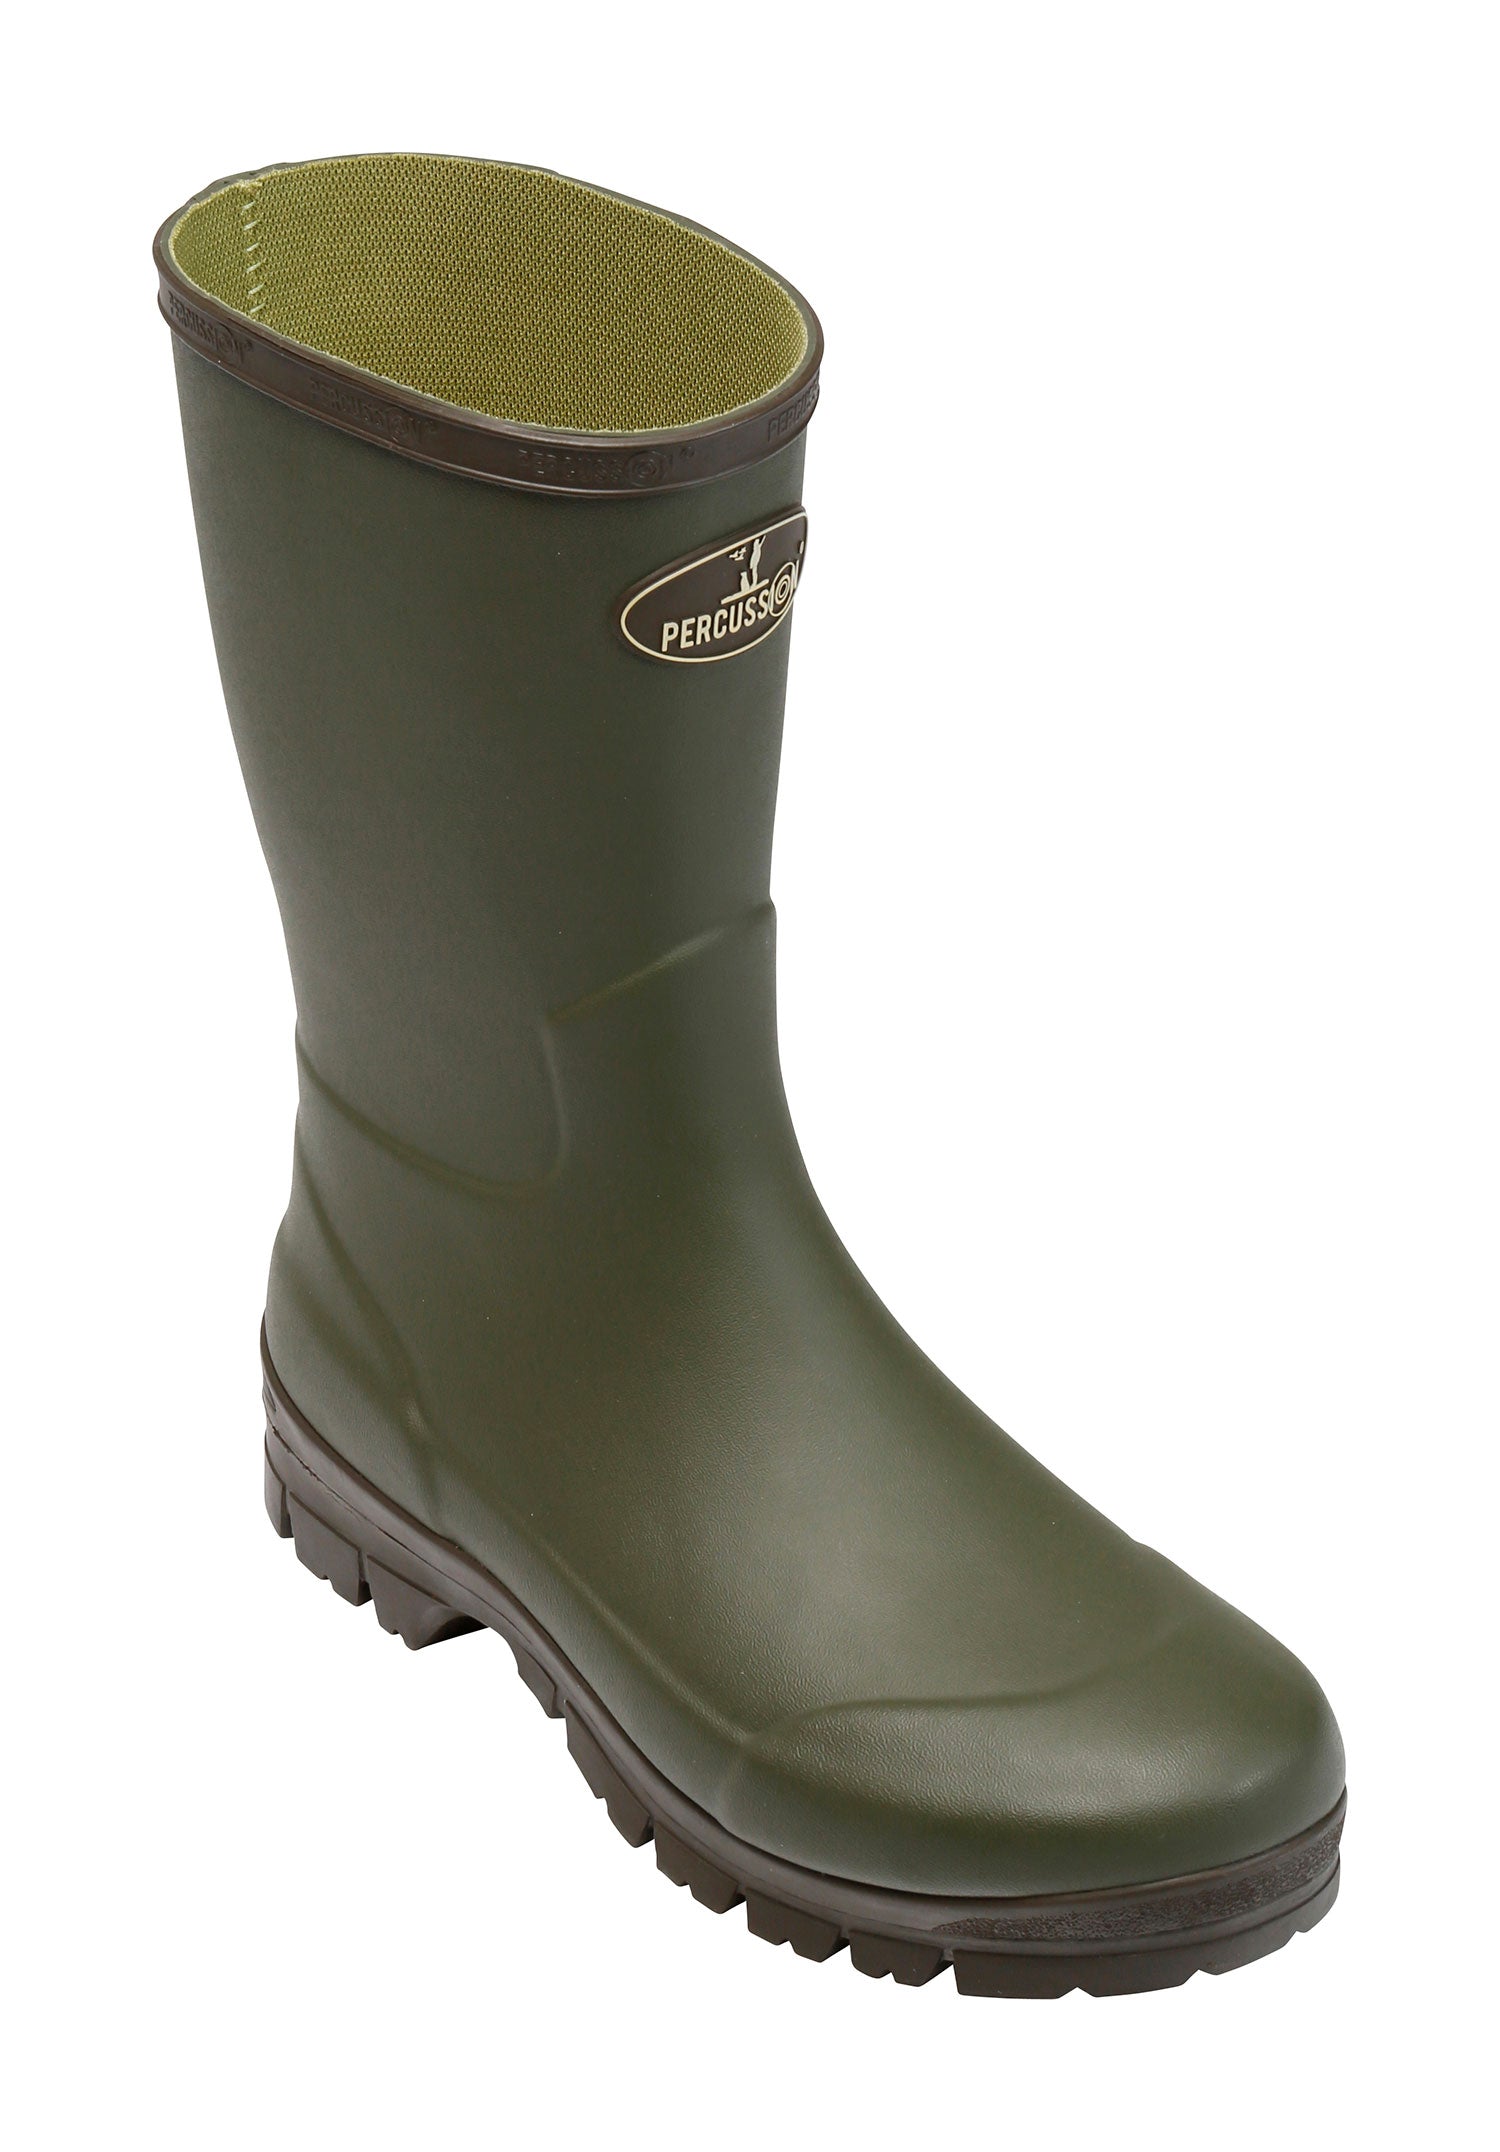 Percussion Marly Demi Jersey Short Wellington Boots